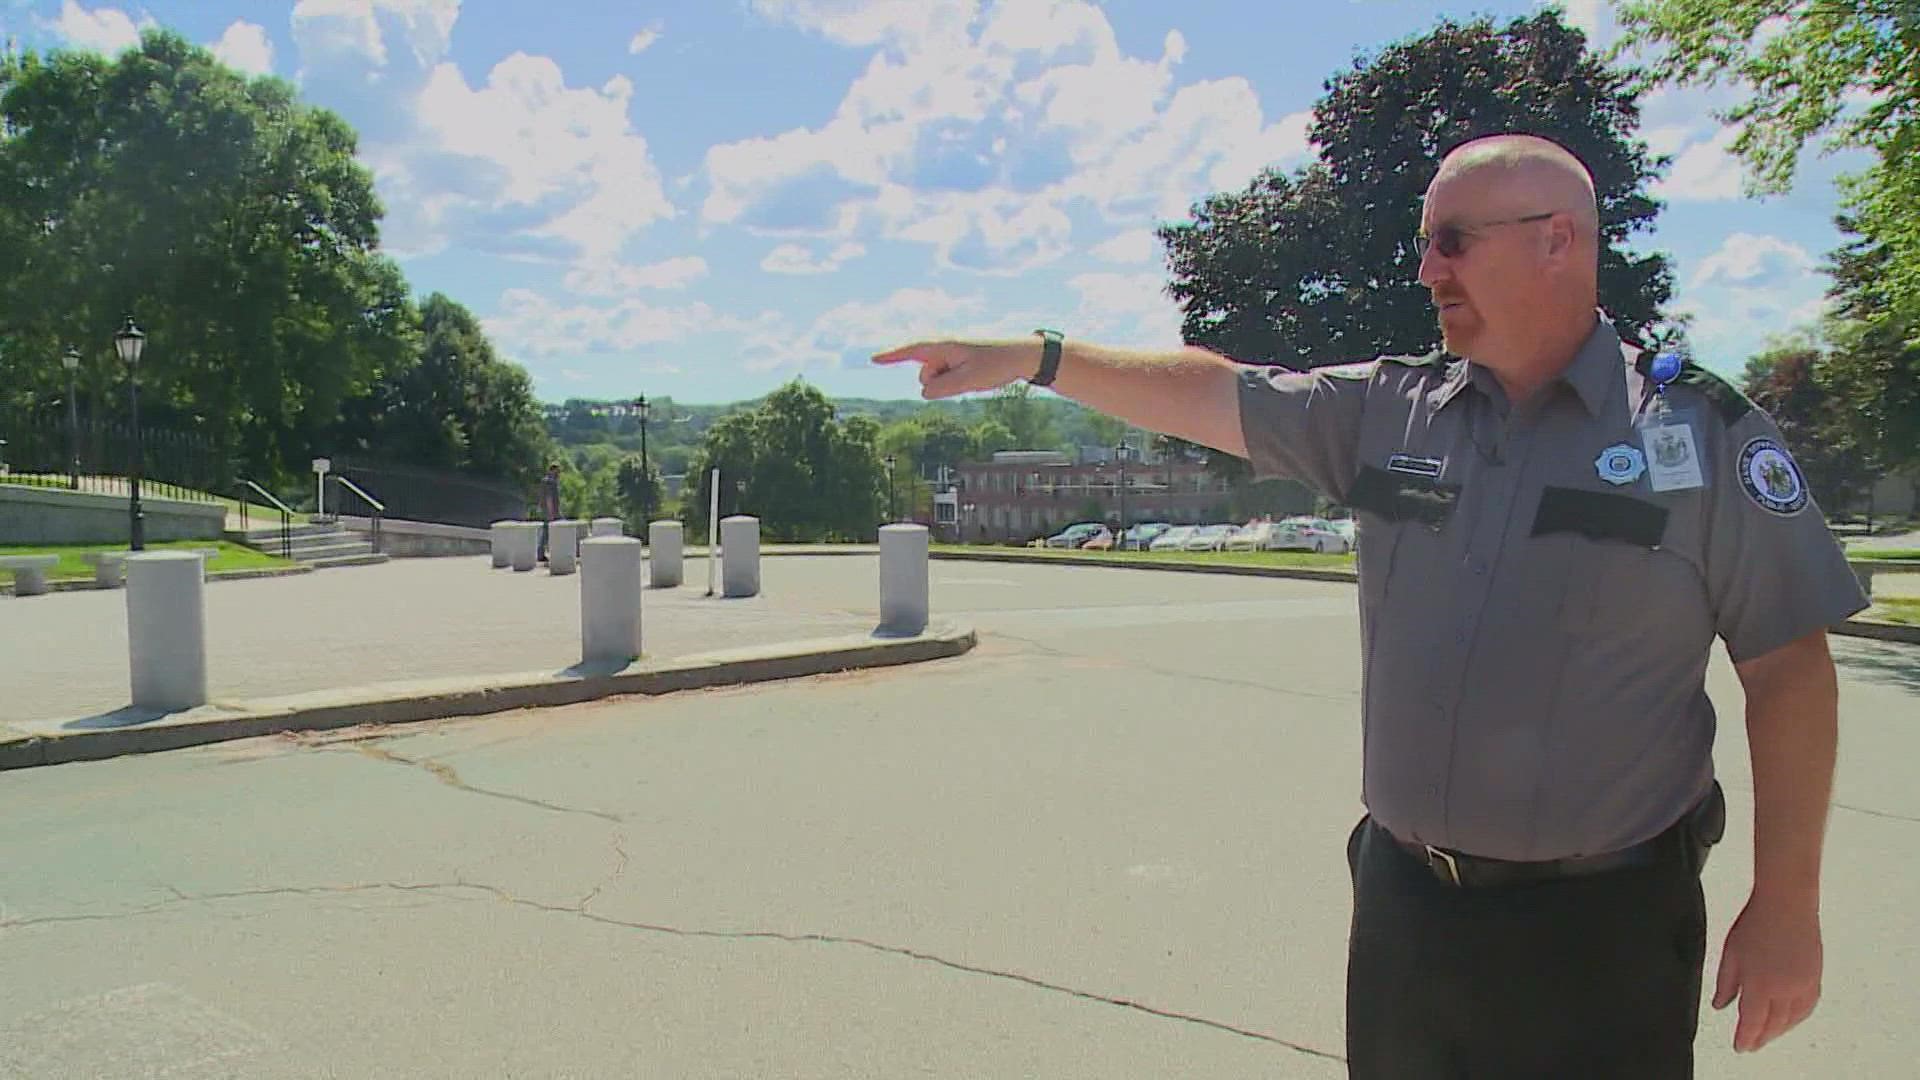 "There's no UFOs over the [Maine] State Capitol building," says Bureau of Maine Capitol Police Screener Craig Donahue.